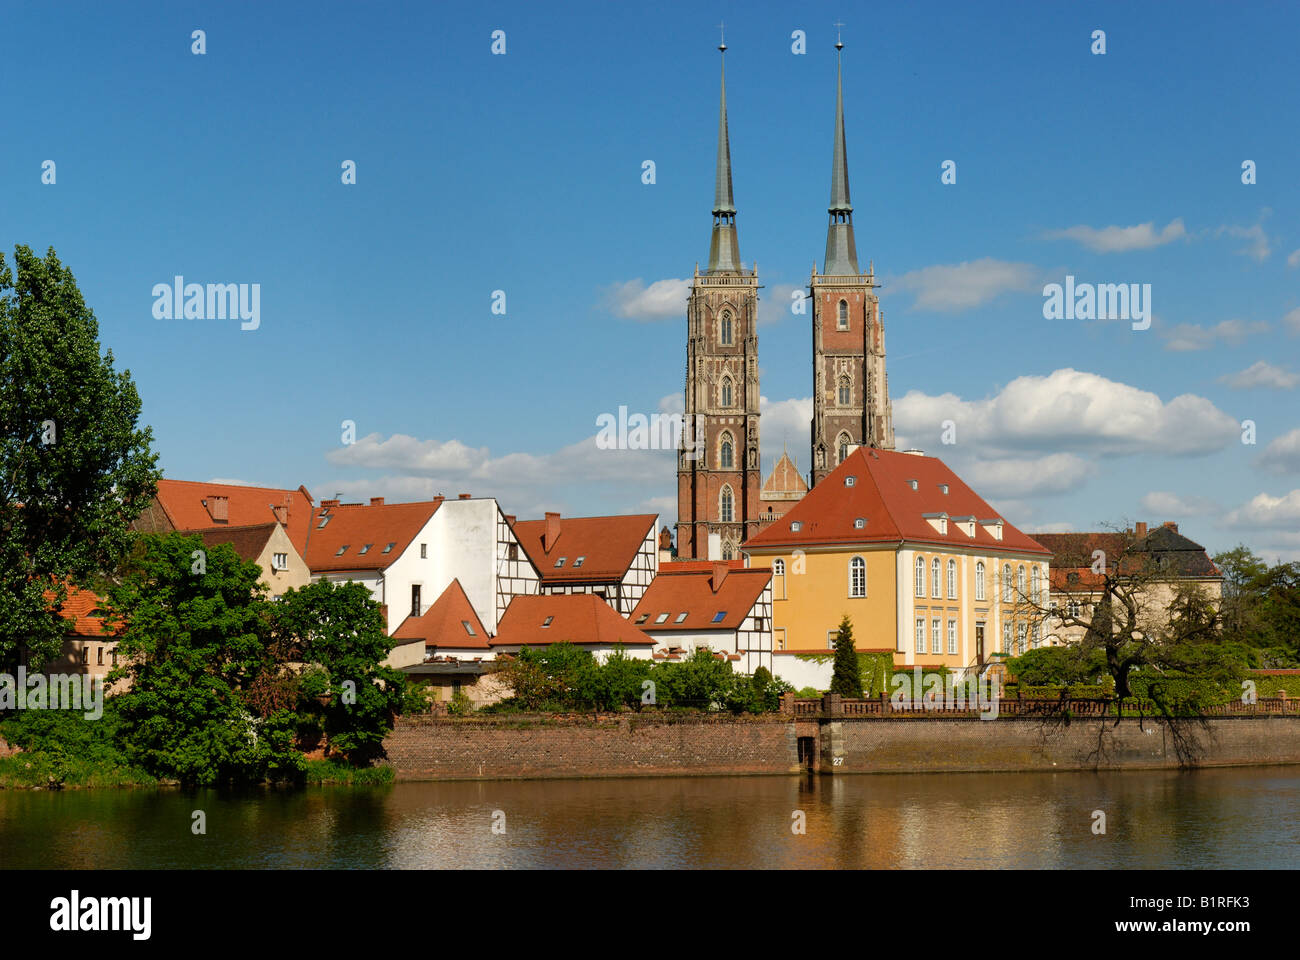 View over the Oder River, Wroclaw Cathedral, Wroclaw, Silesia, Poland, Europe Stock Photo